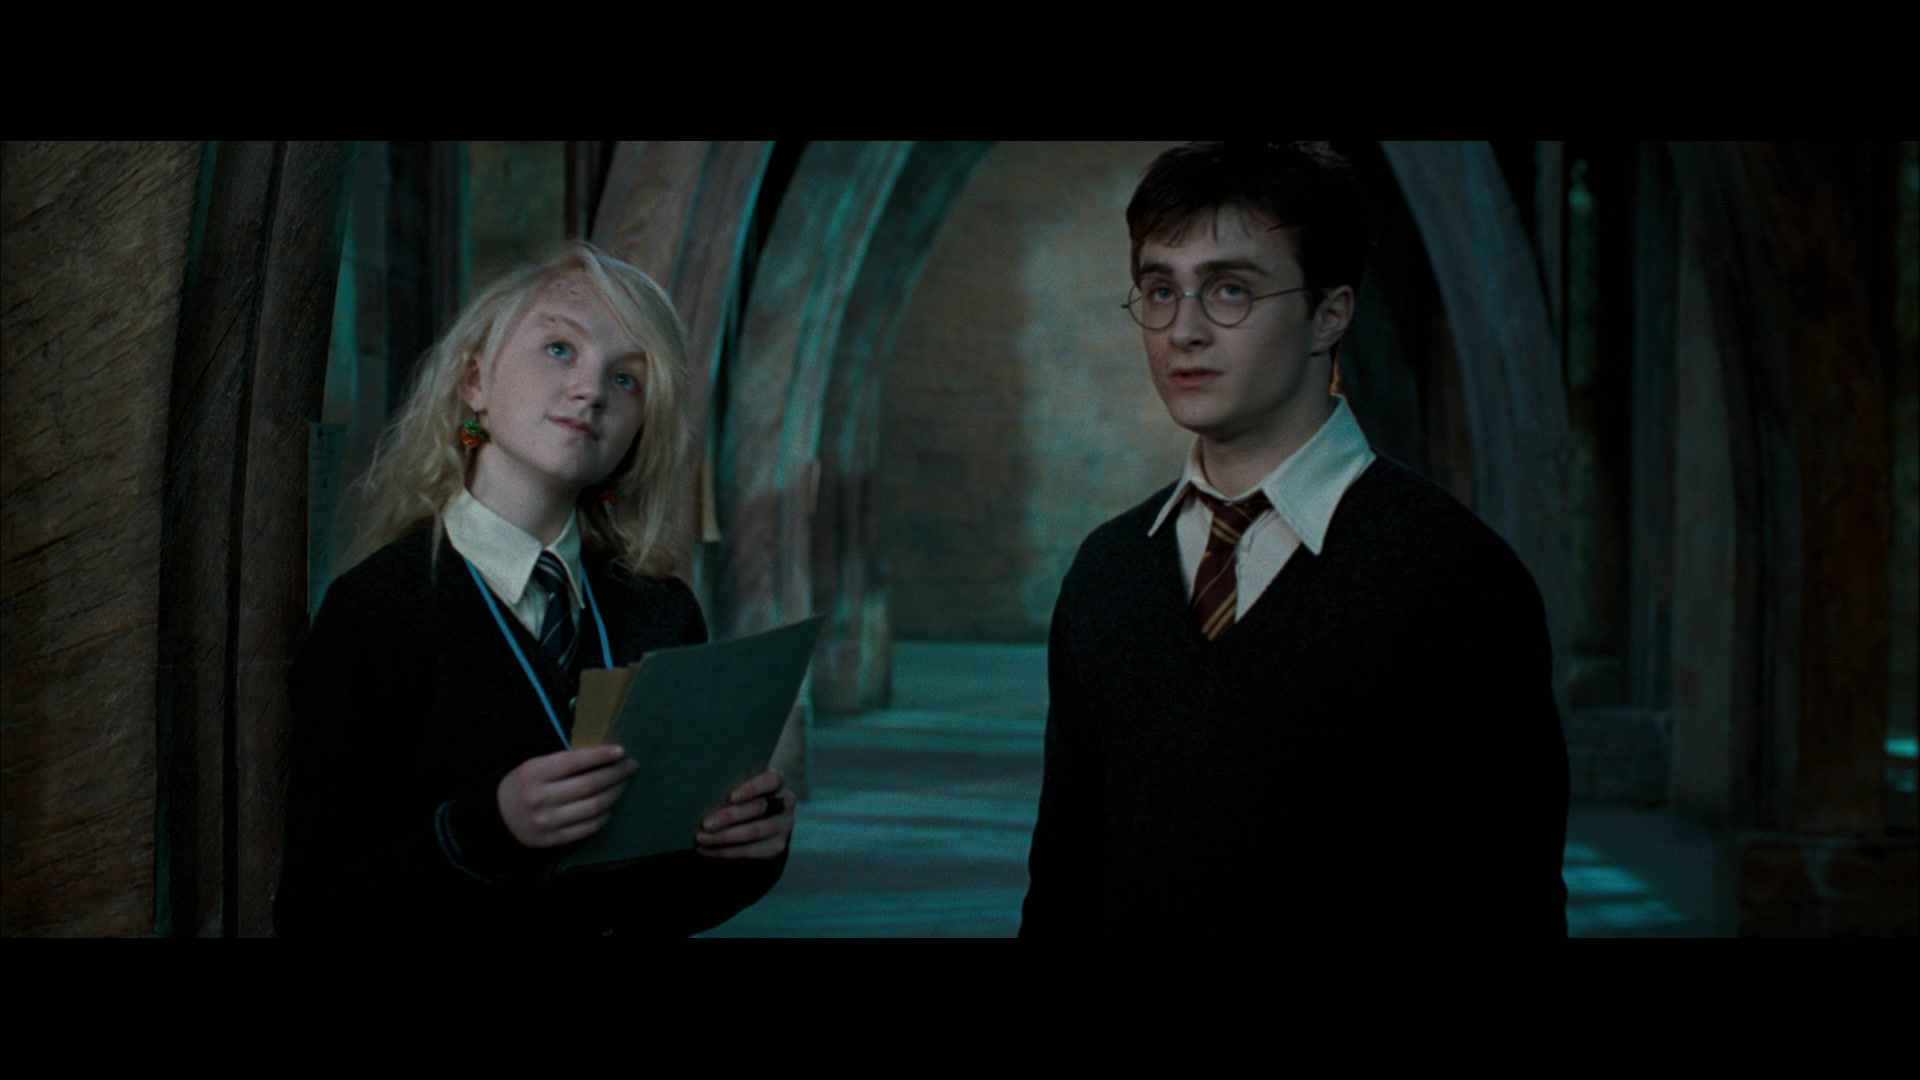 Harry Potter (Daniel Radcliffe) stumbles upon Luna Lovegood (Evanna Lynch) look to the future in Harry Potter and the Order of the Phoenix (2007), Warner Bros. Pictures